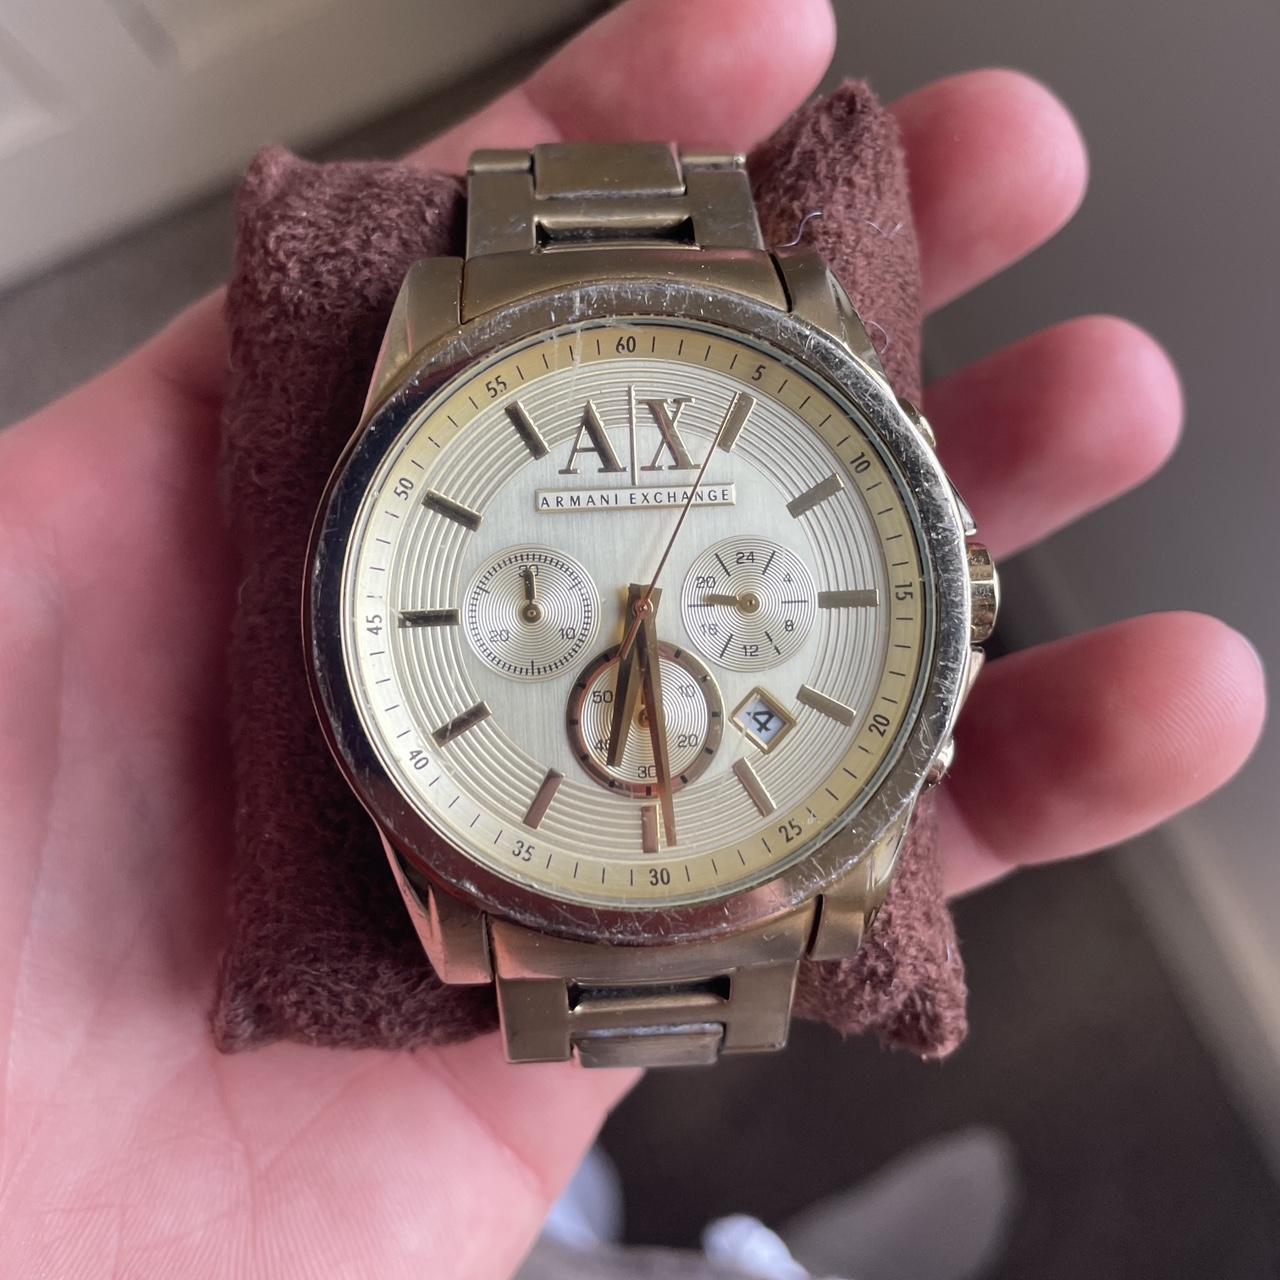 Armani watch. Good condition. Open to offers - Depop